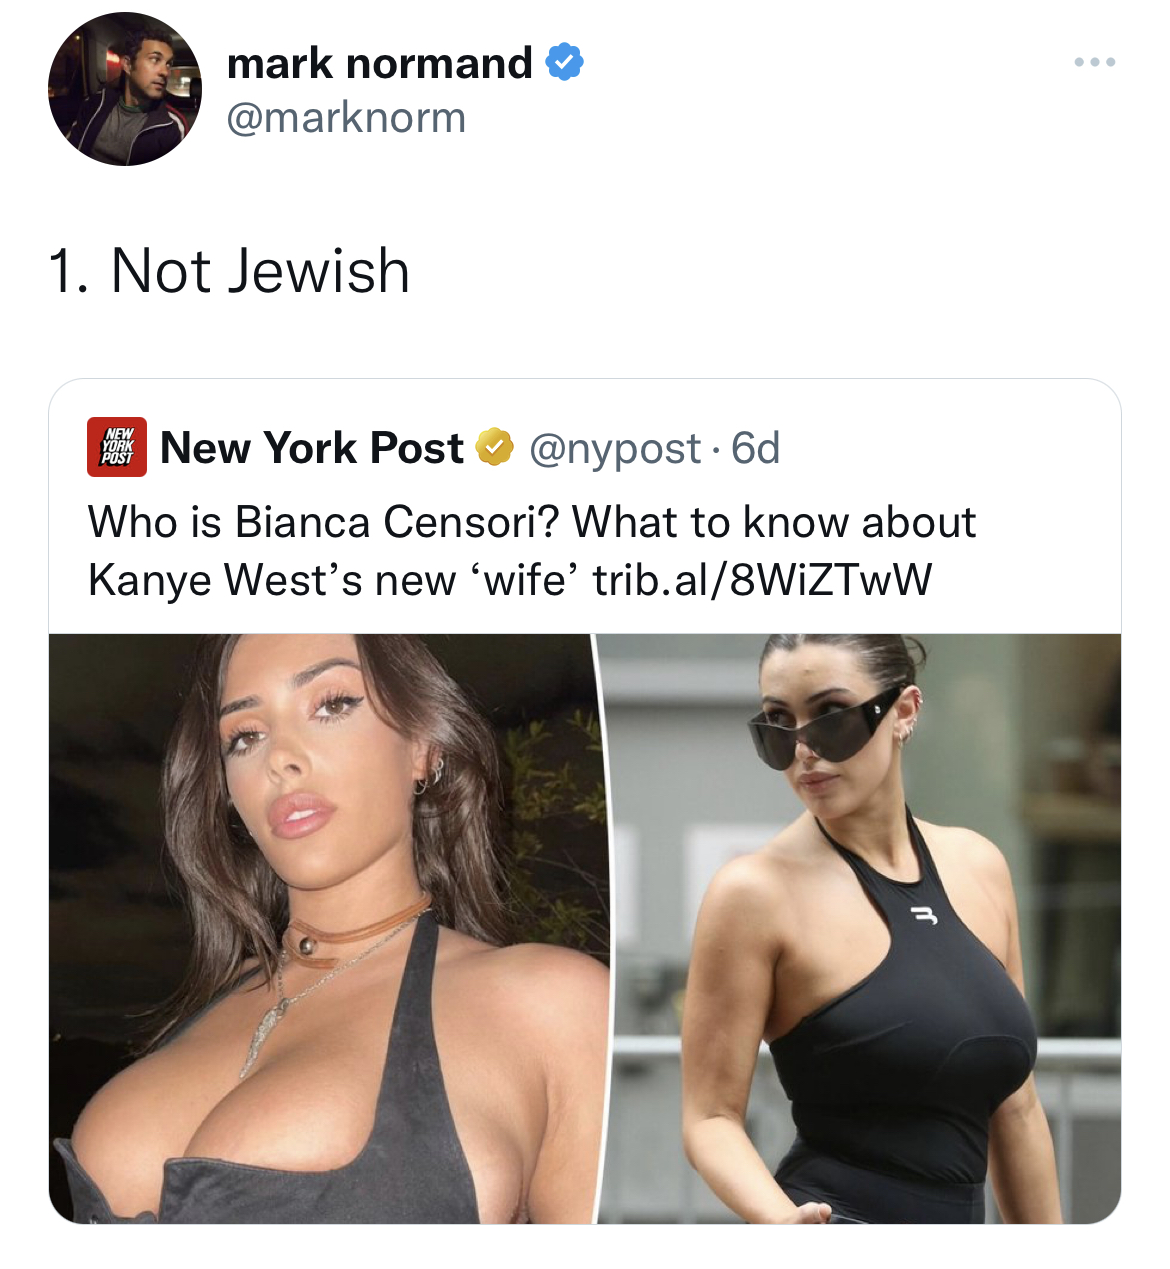 Tweets Dunking on Celebs - bianca censori - mark normand 1. Not Jewish New York Post Who is Bianca Censori? What to know about Kanye West's new 'wife' trib.al8WiZTwW